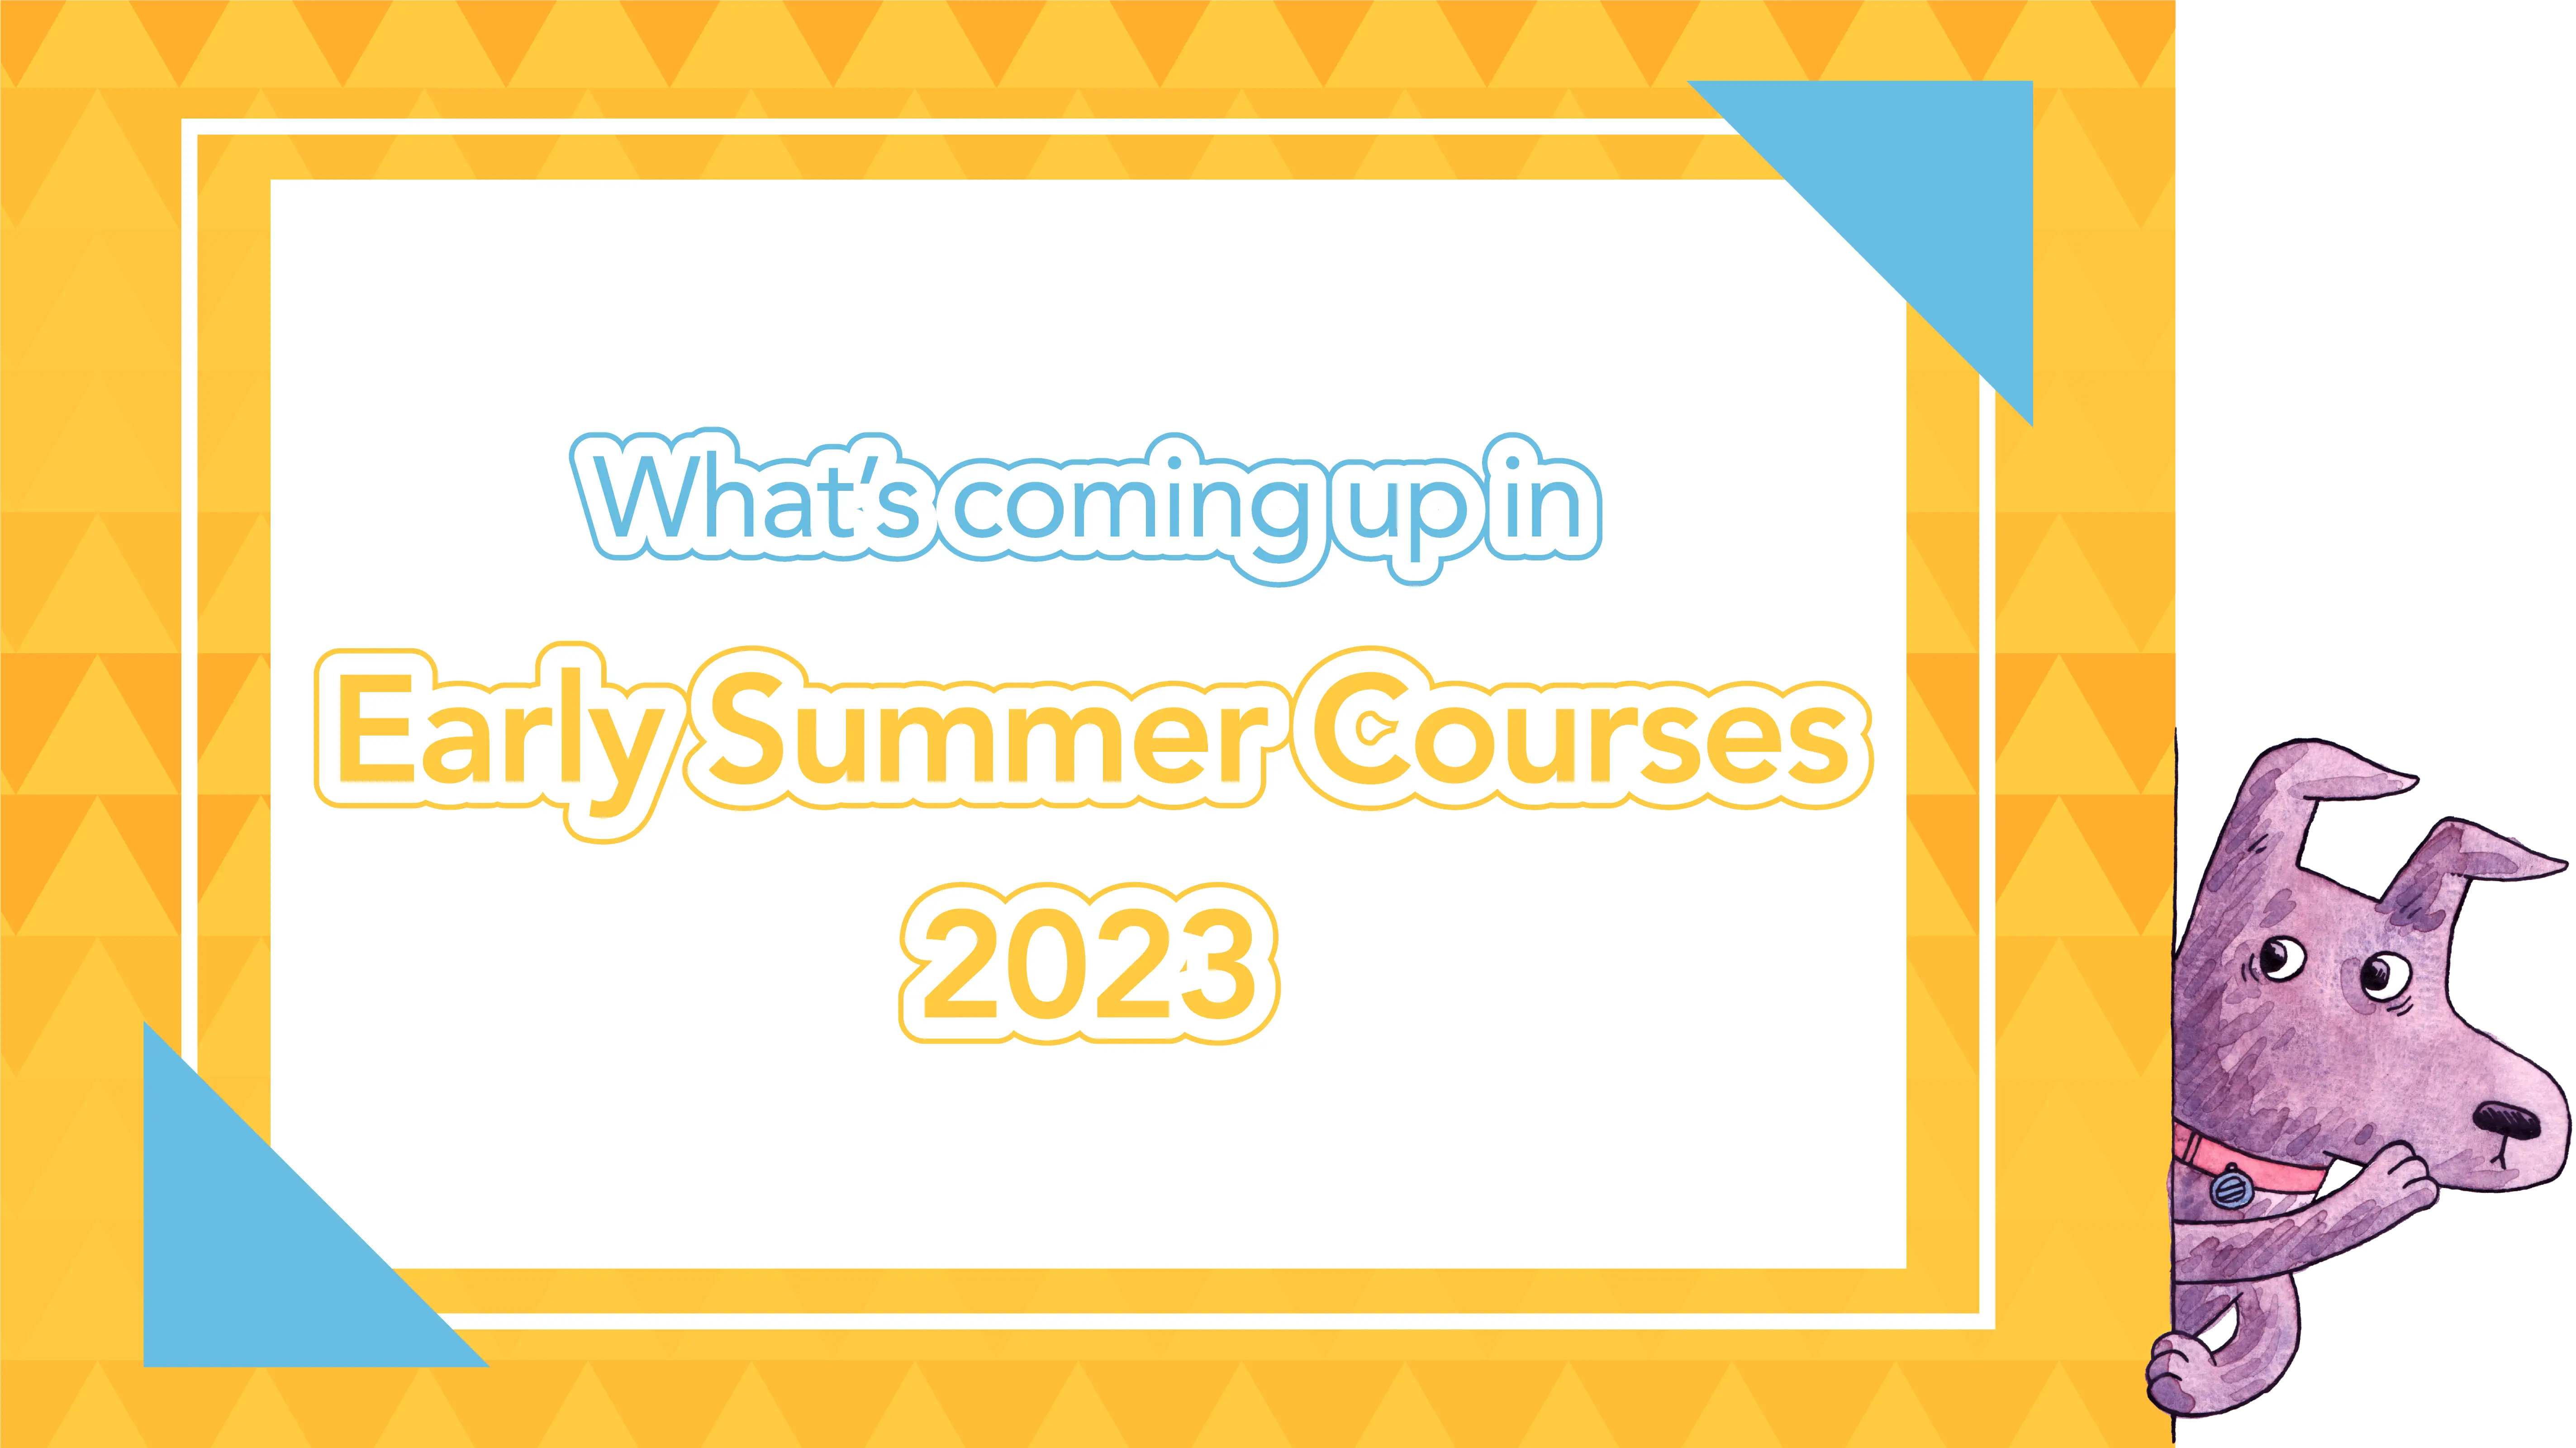 Early Summer Courses 2023  開講コース（6月〜7月）